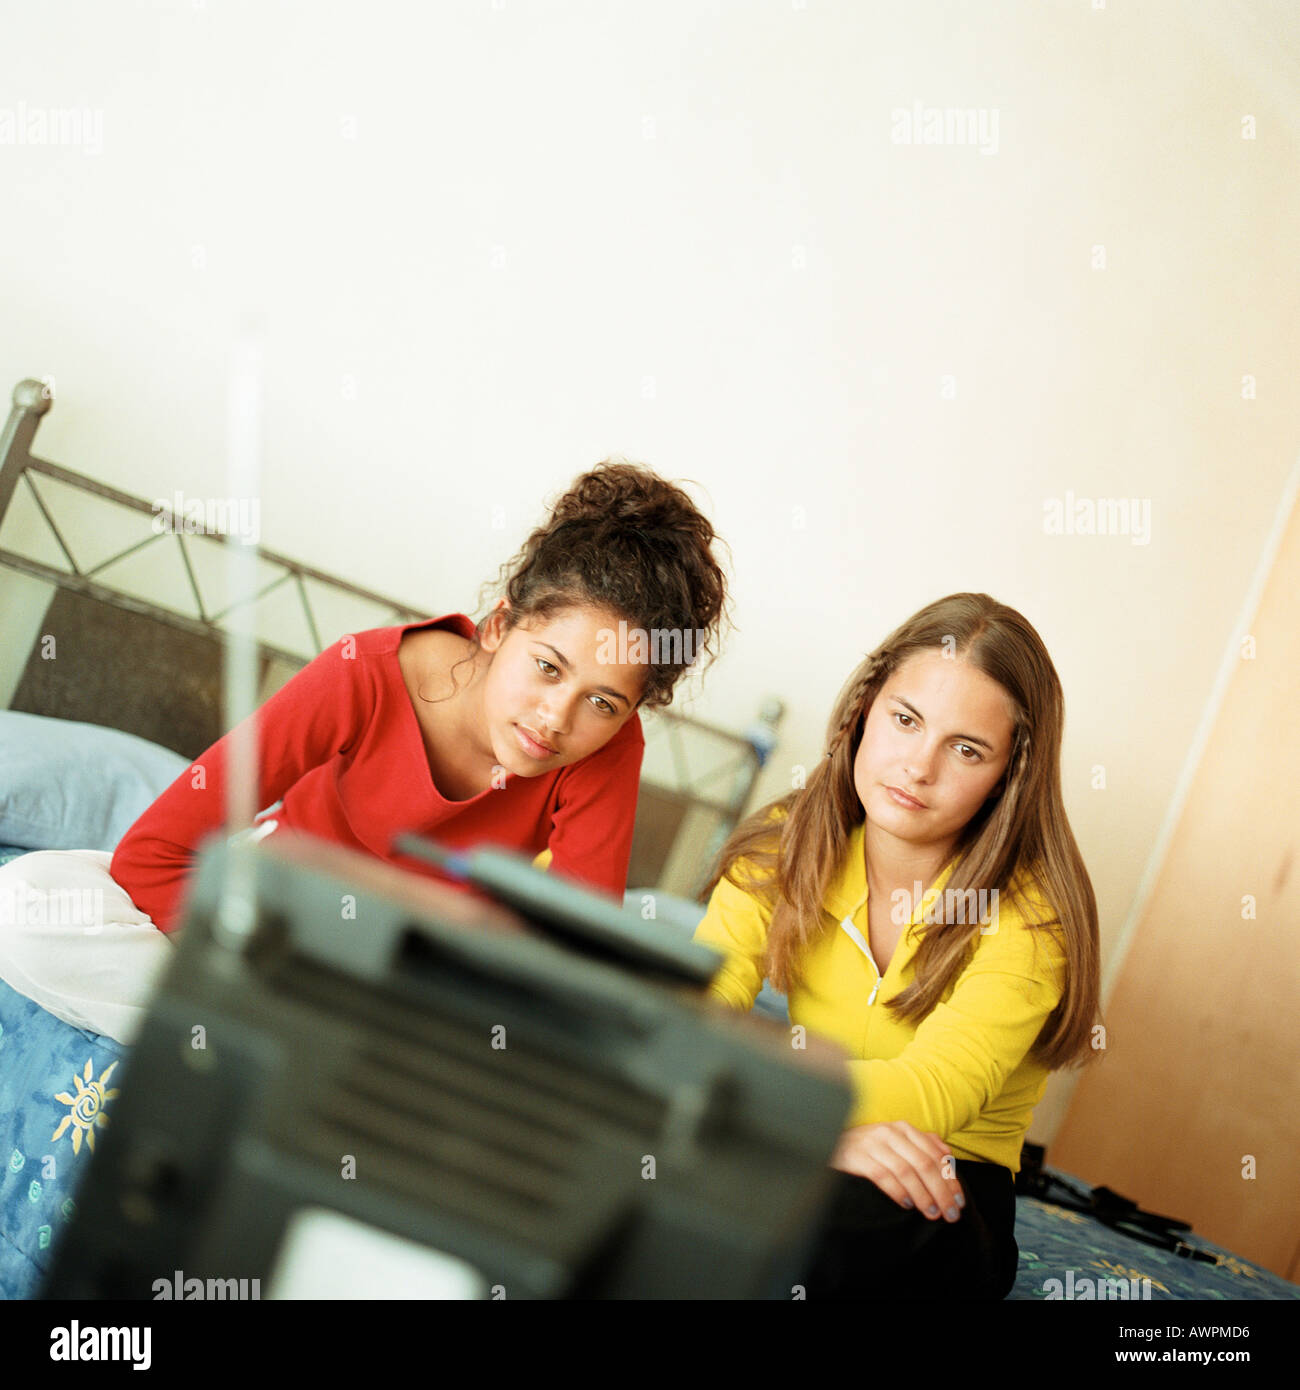 Two girls on bed watching television Stock Photo